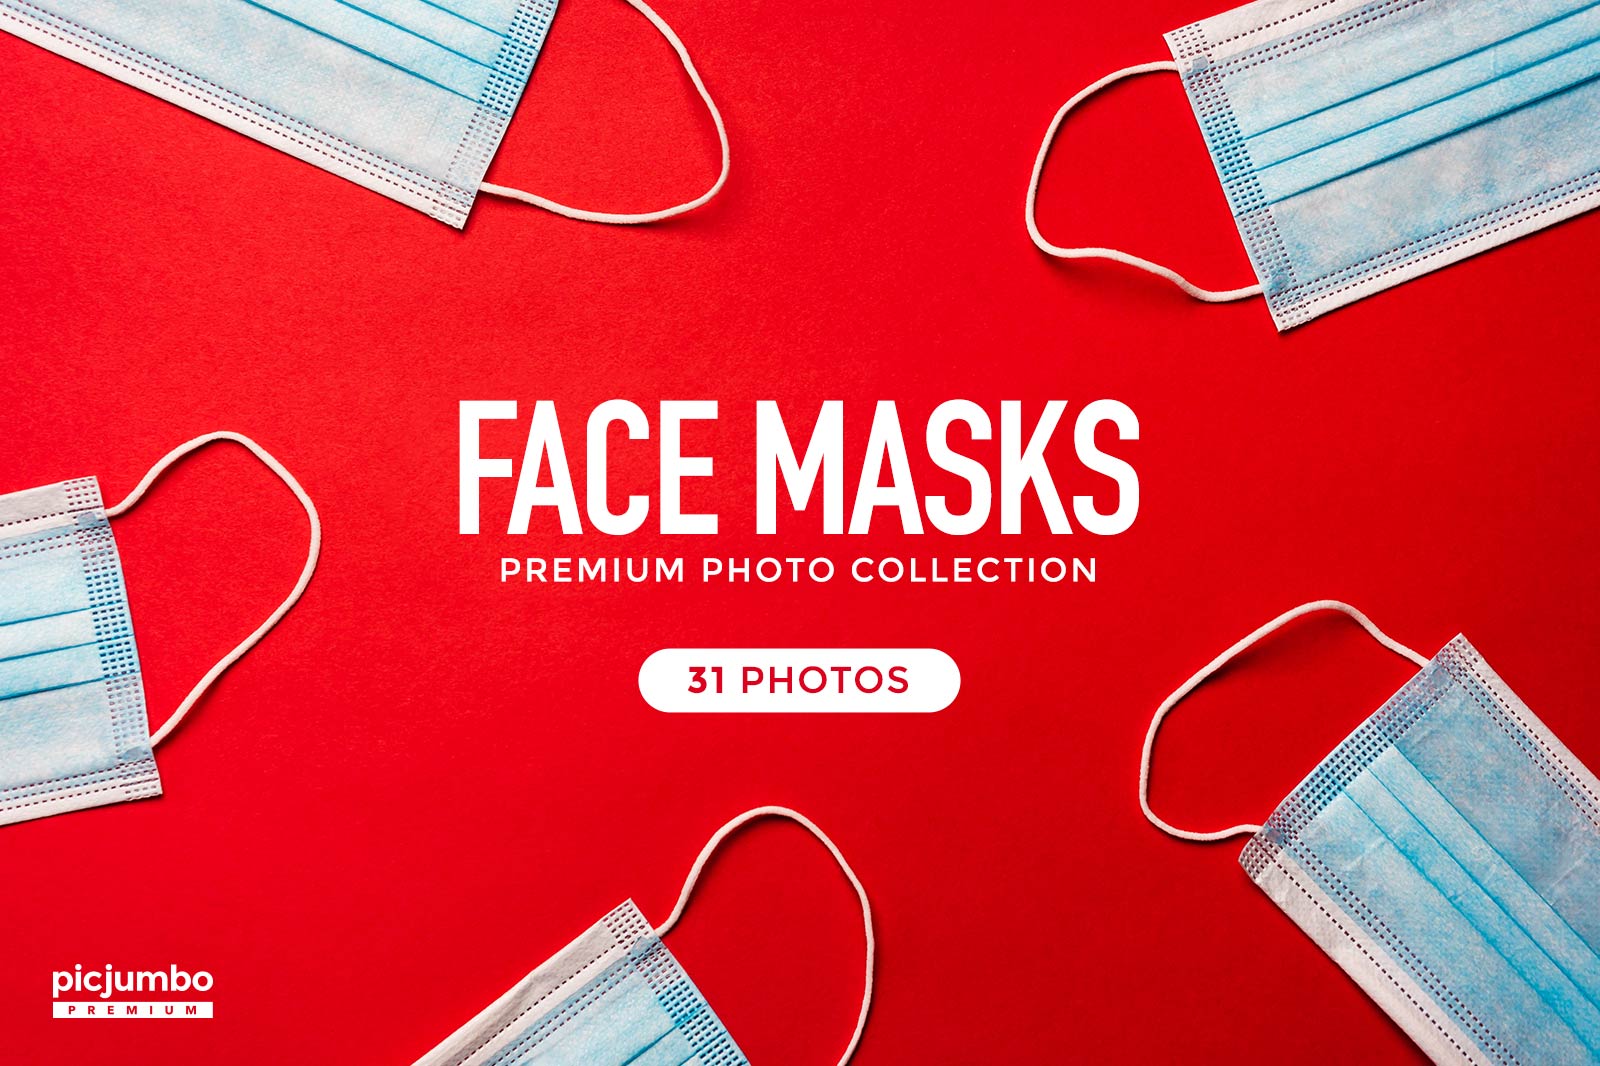 Download hi-res stock photos from our Face Masks PREMIUM Collection!